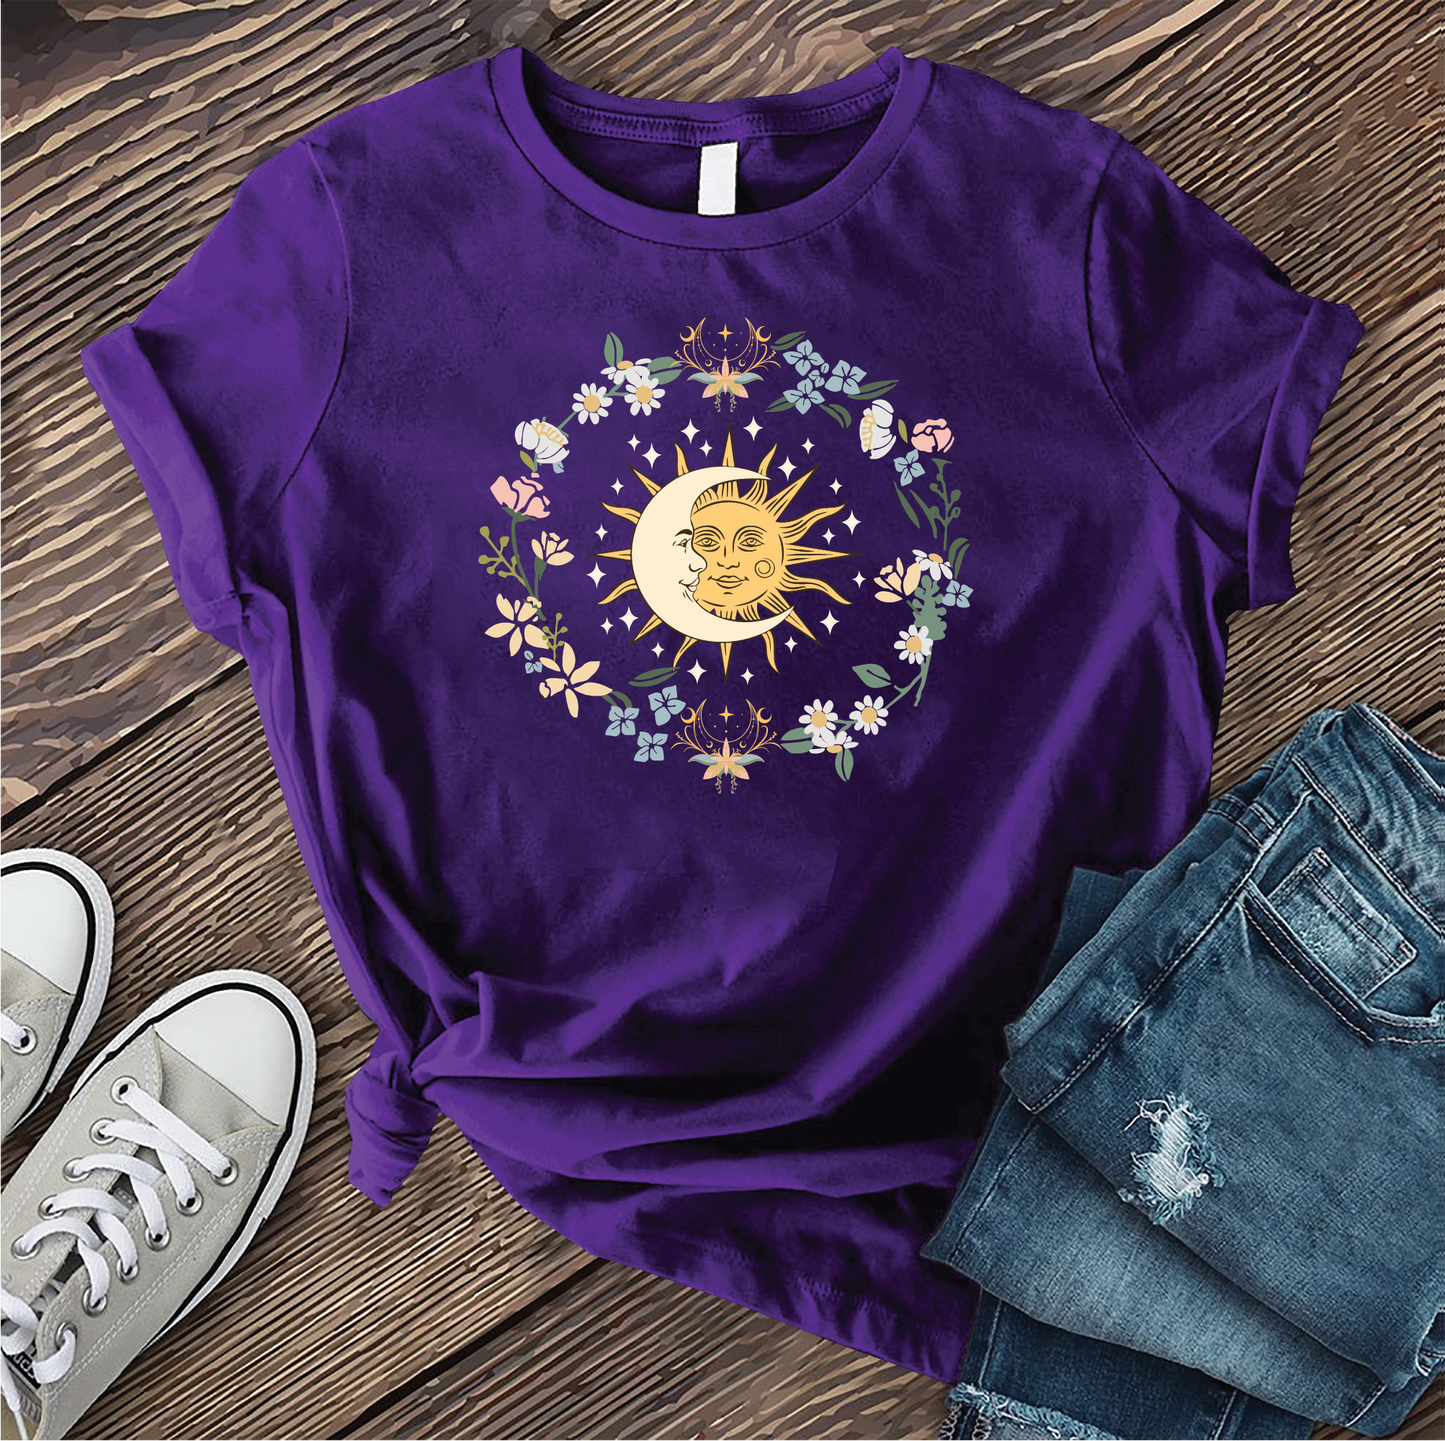 Floral Moon and Sun T-shirt